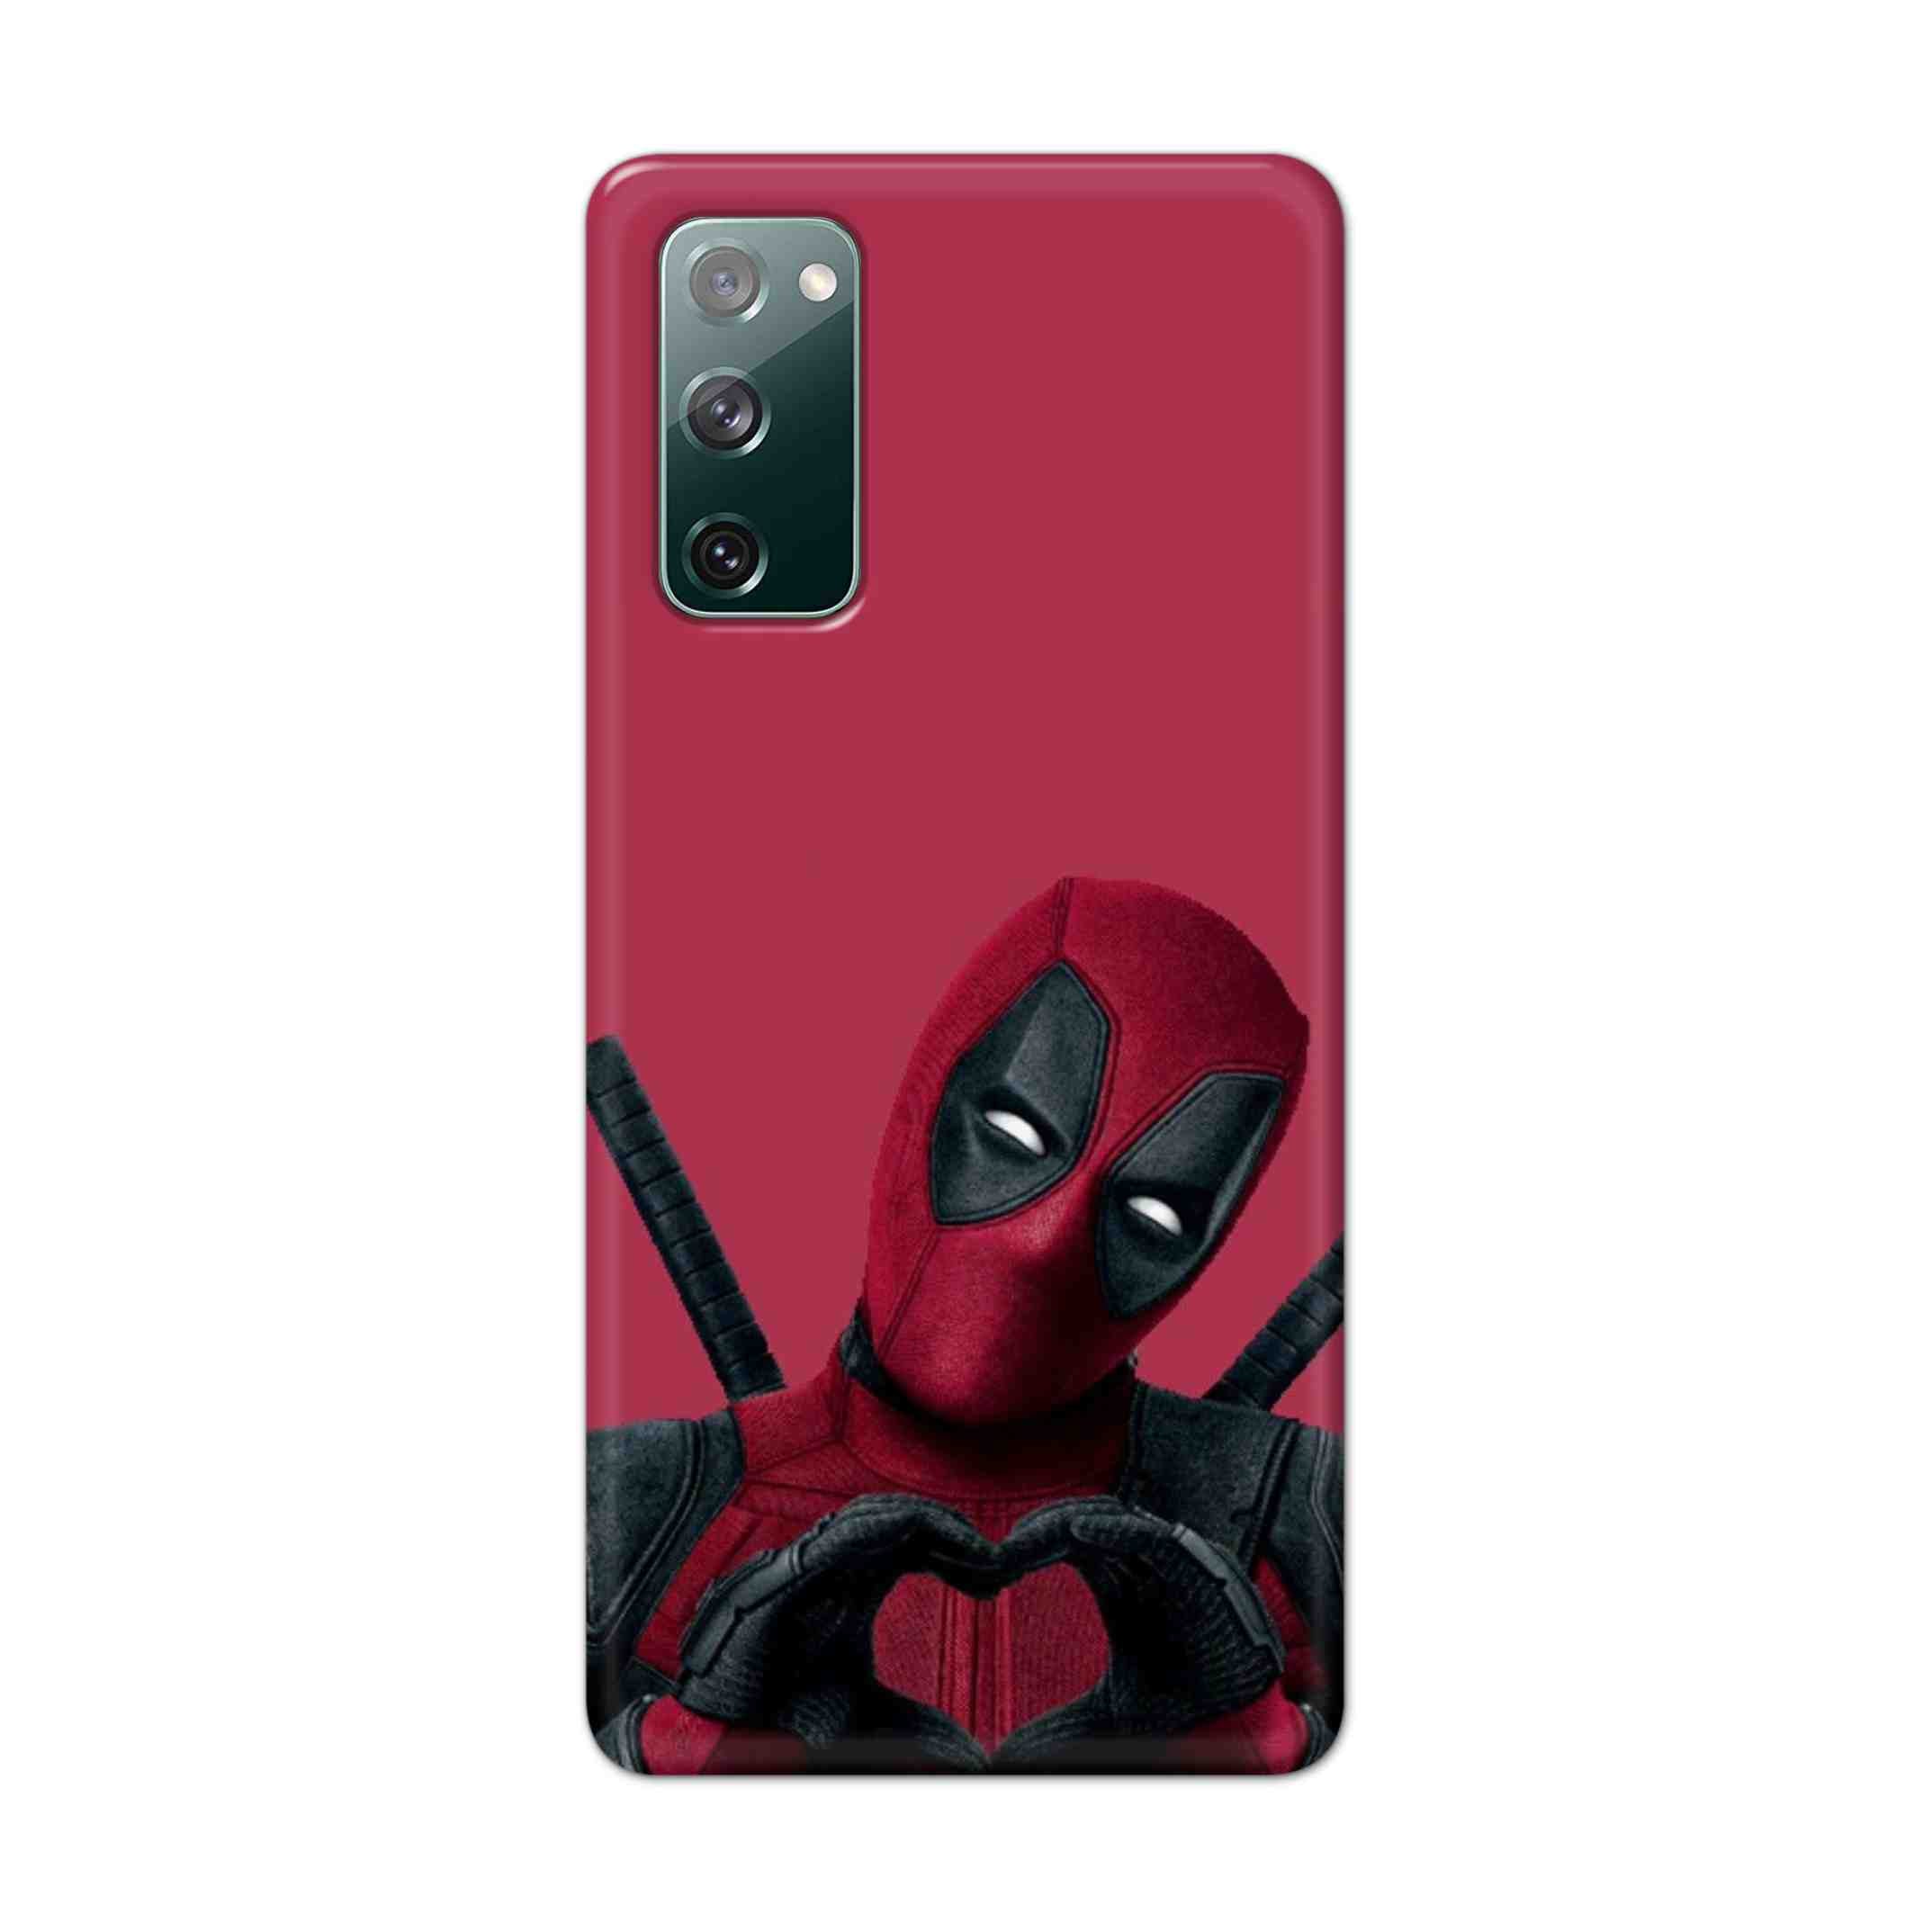 Buy Deadpool Heart Hard Back Mobile Phone Case Cover For Samsung Galaxy S20 FE Online